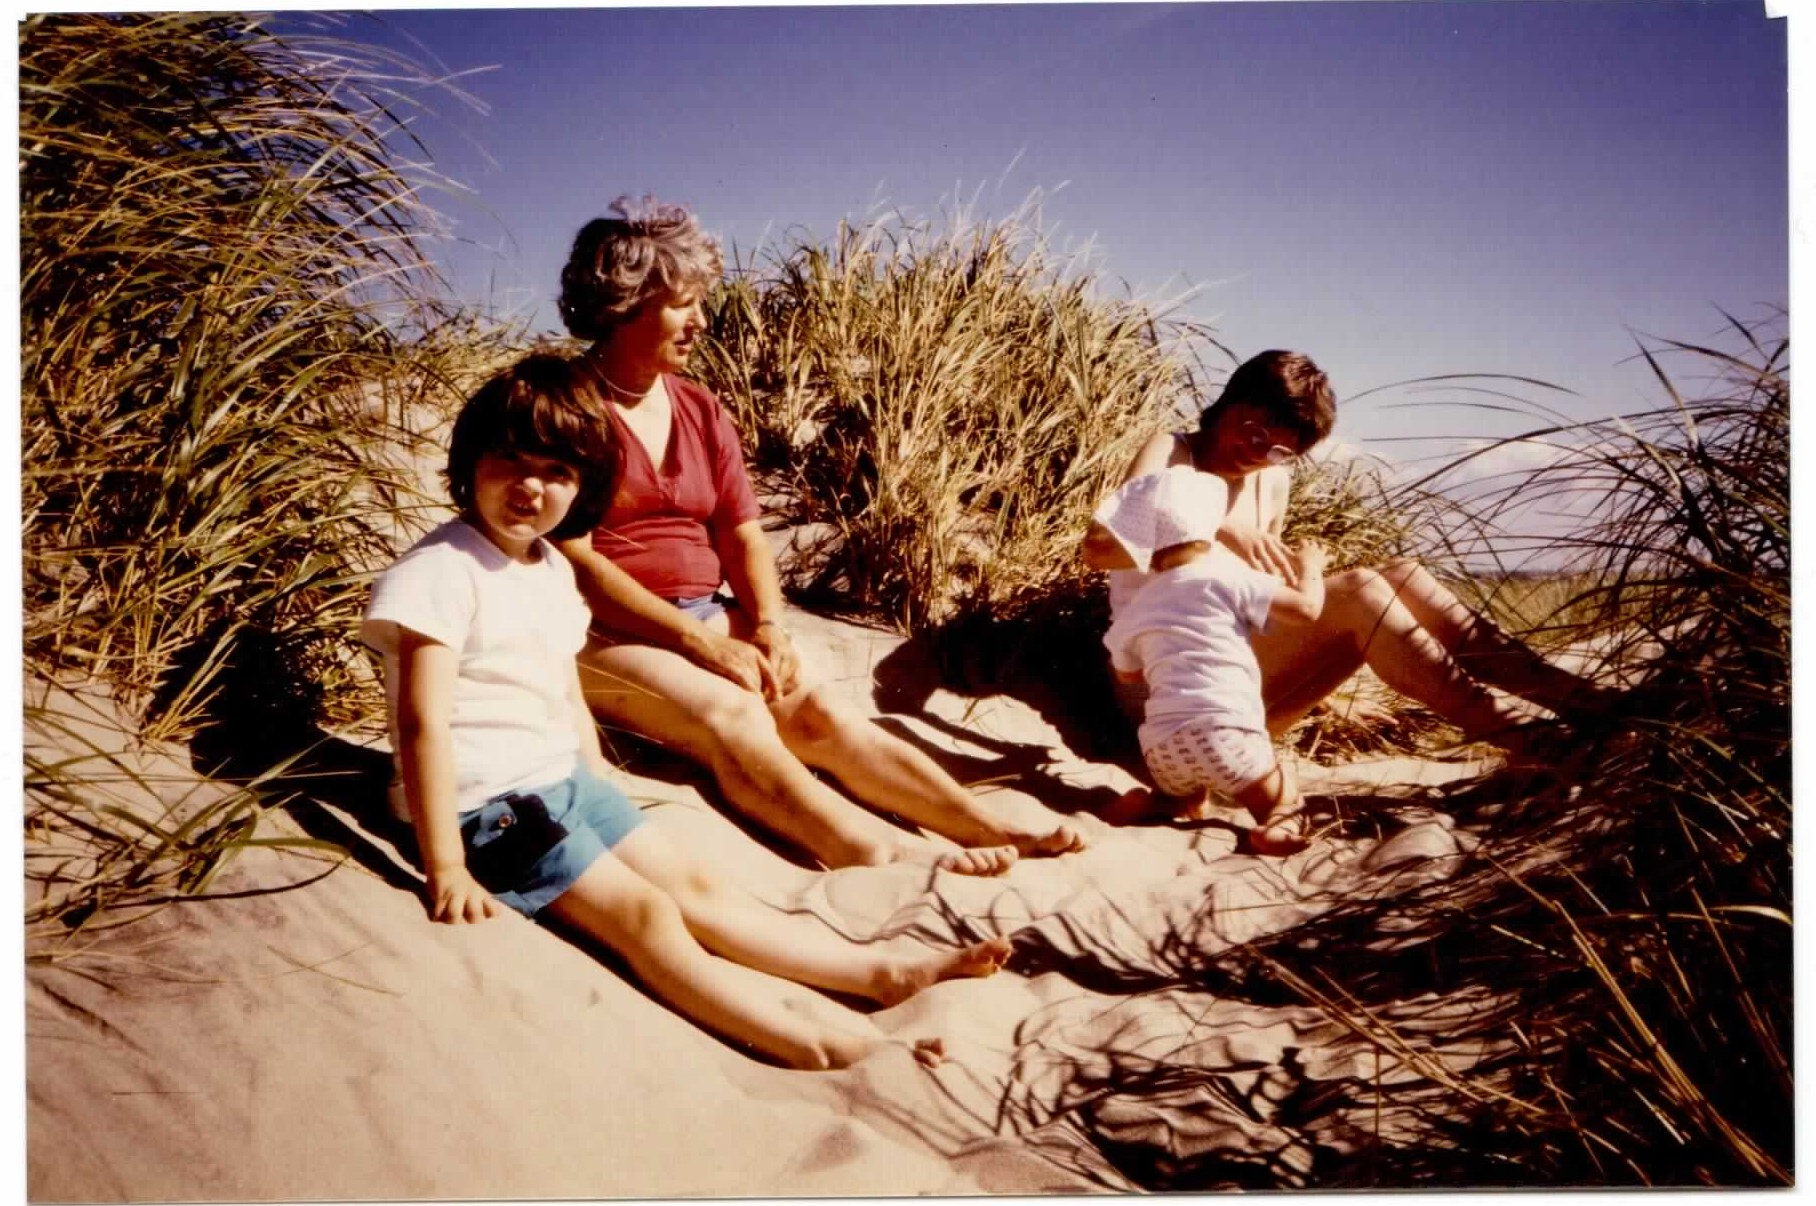 A sunny day in Denmark - a treat for us, as we were used to go there in spring and fall. I'm the one with that Beatles' hairstyle. :)